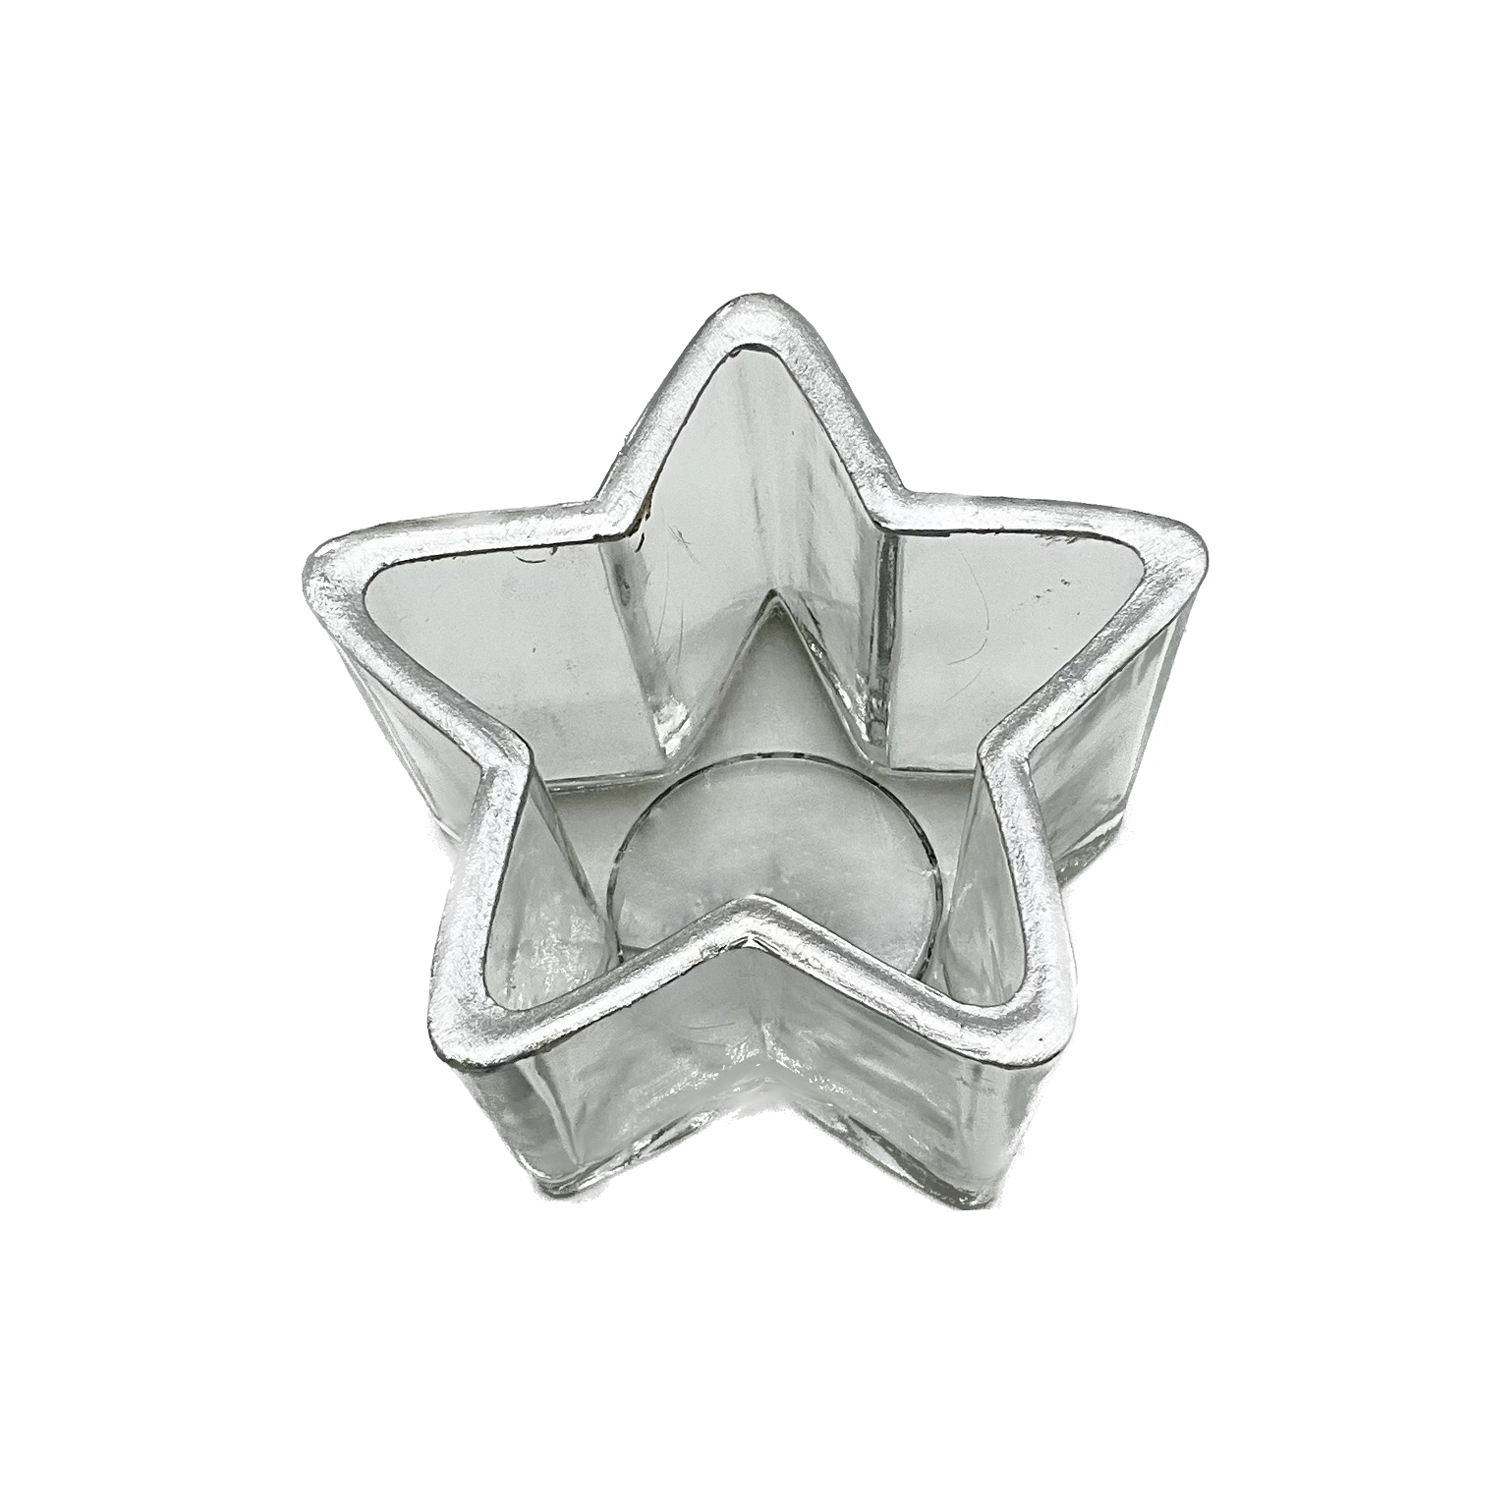 Glass Star Tealight Holder With Silver Trim 10cm Gift